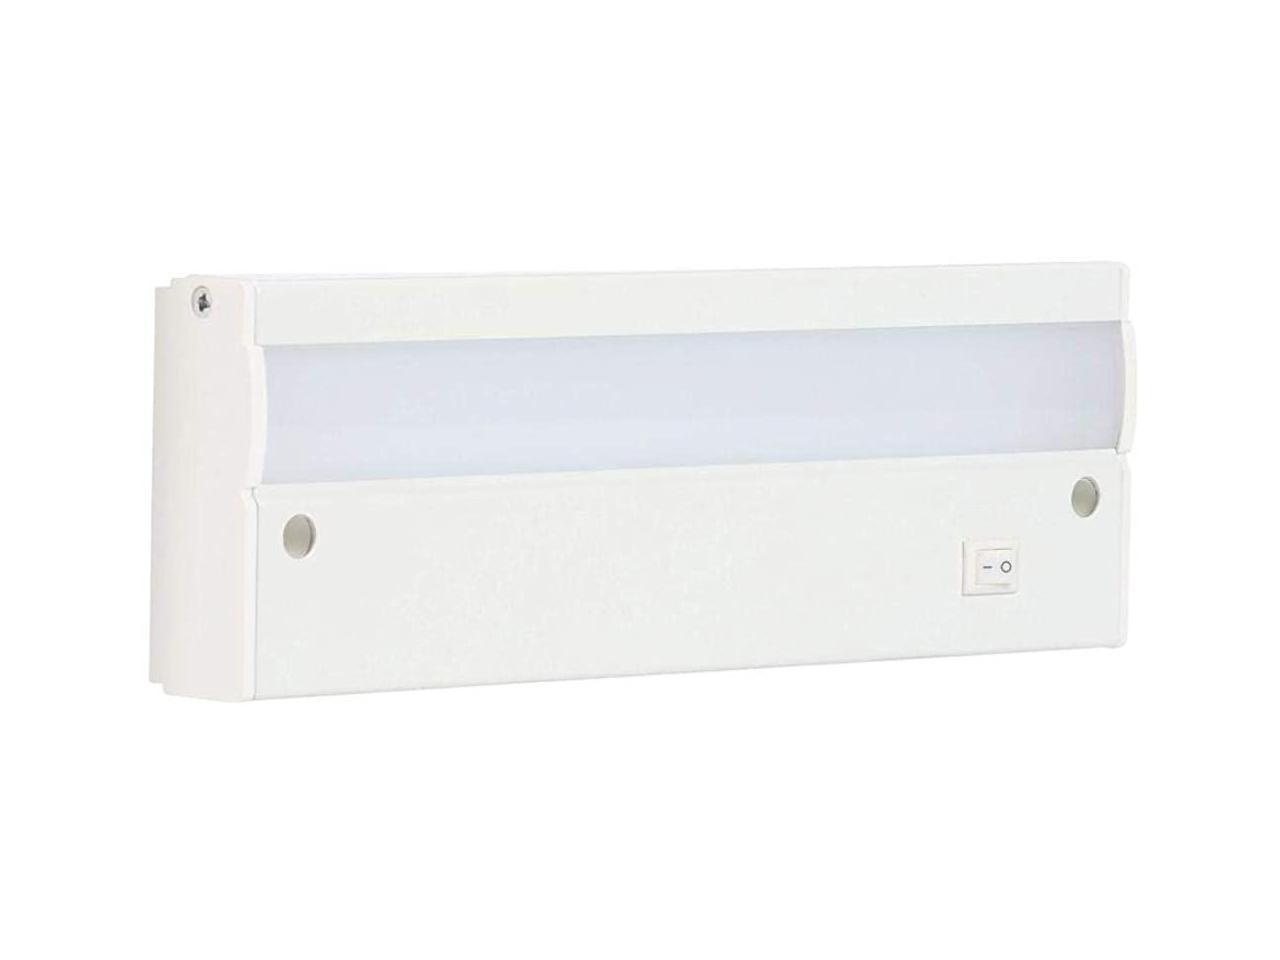 LED White Under Cabinet Light Commercial Electric 9 in